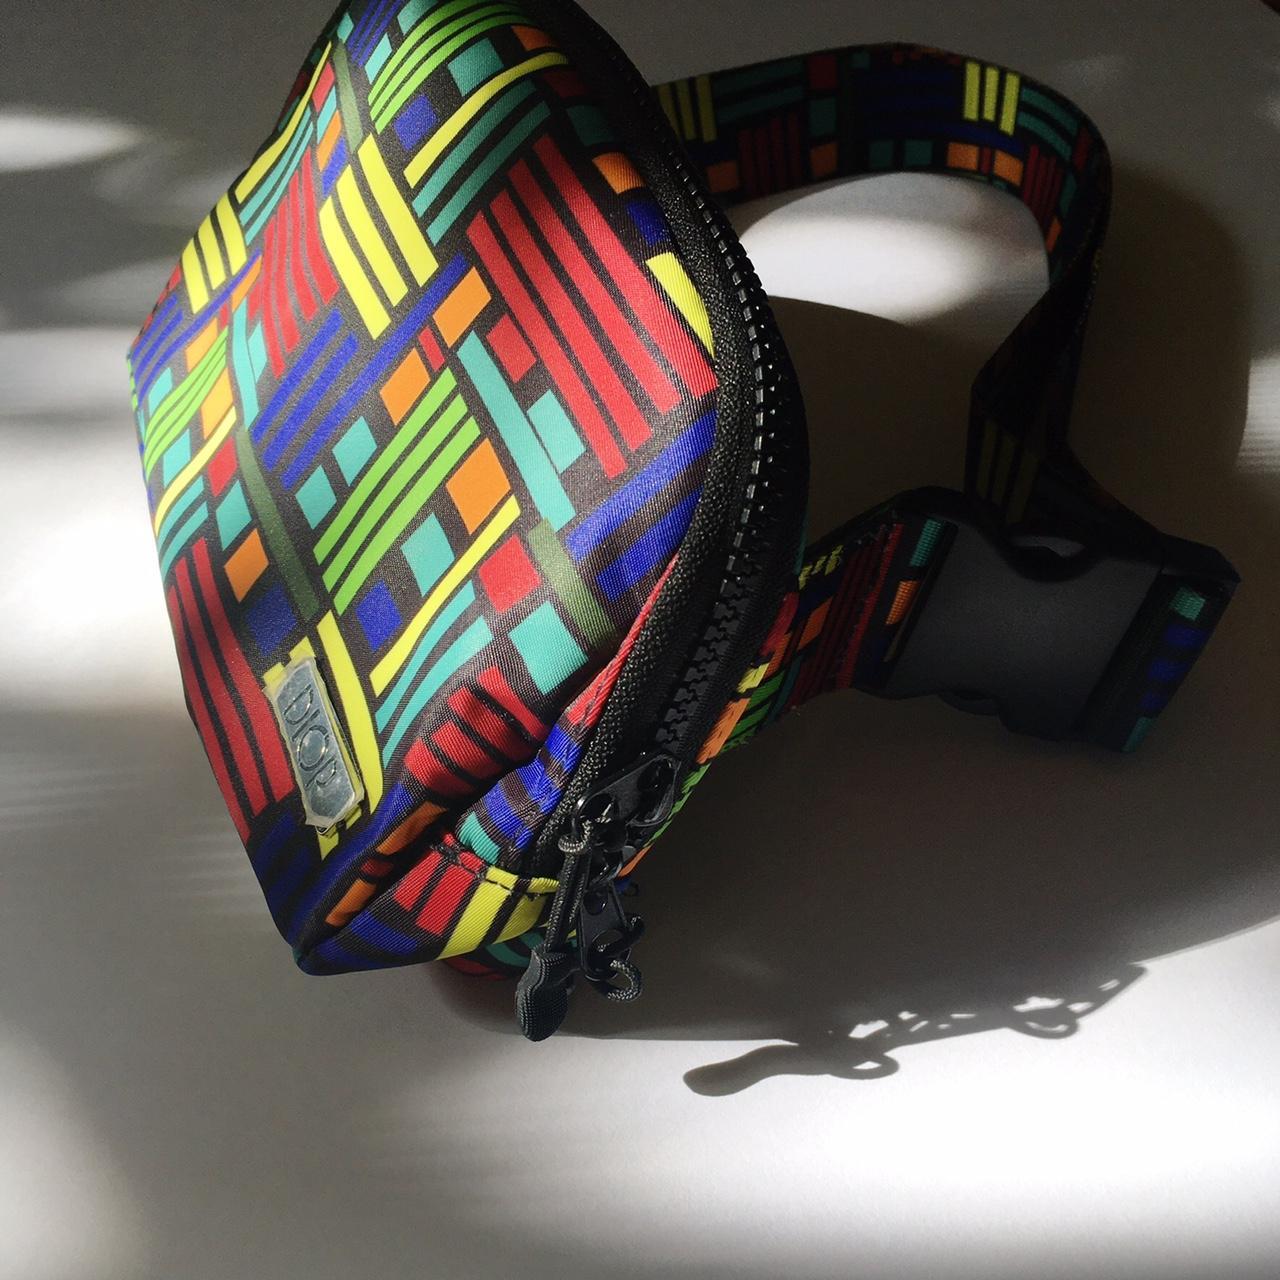 Product Image 4 - Diop the Weka Fanny Pack

Super